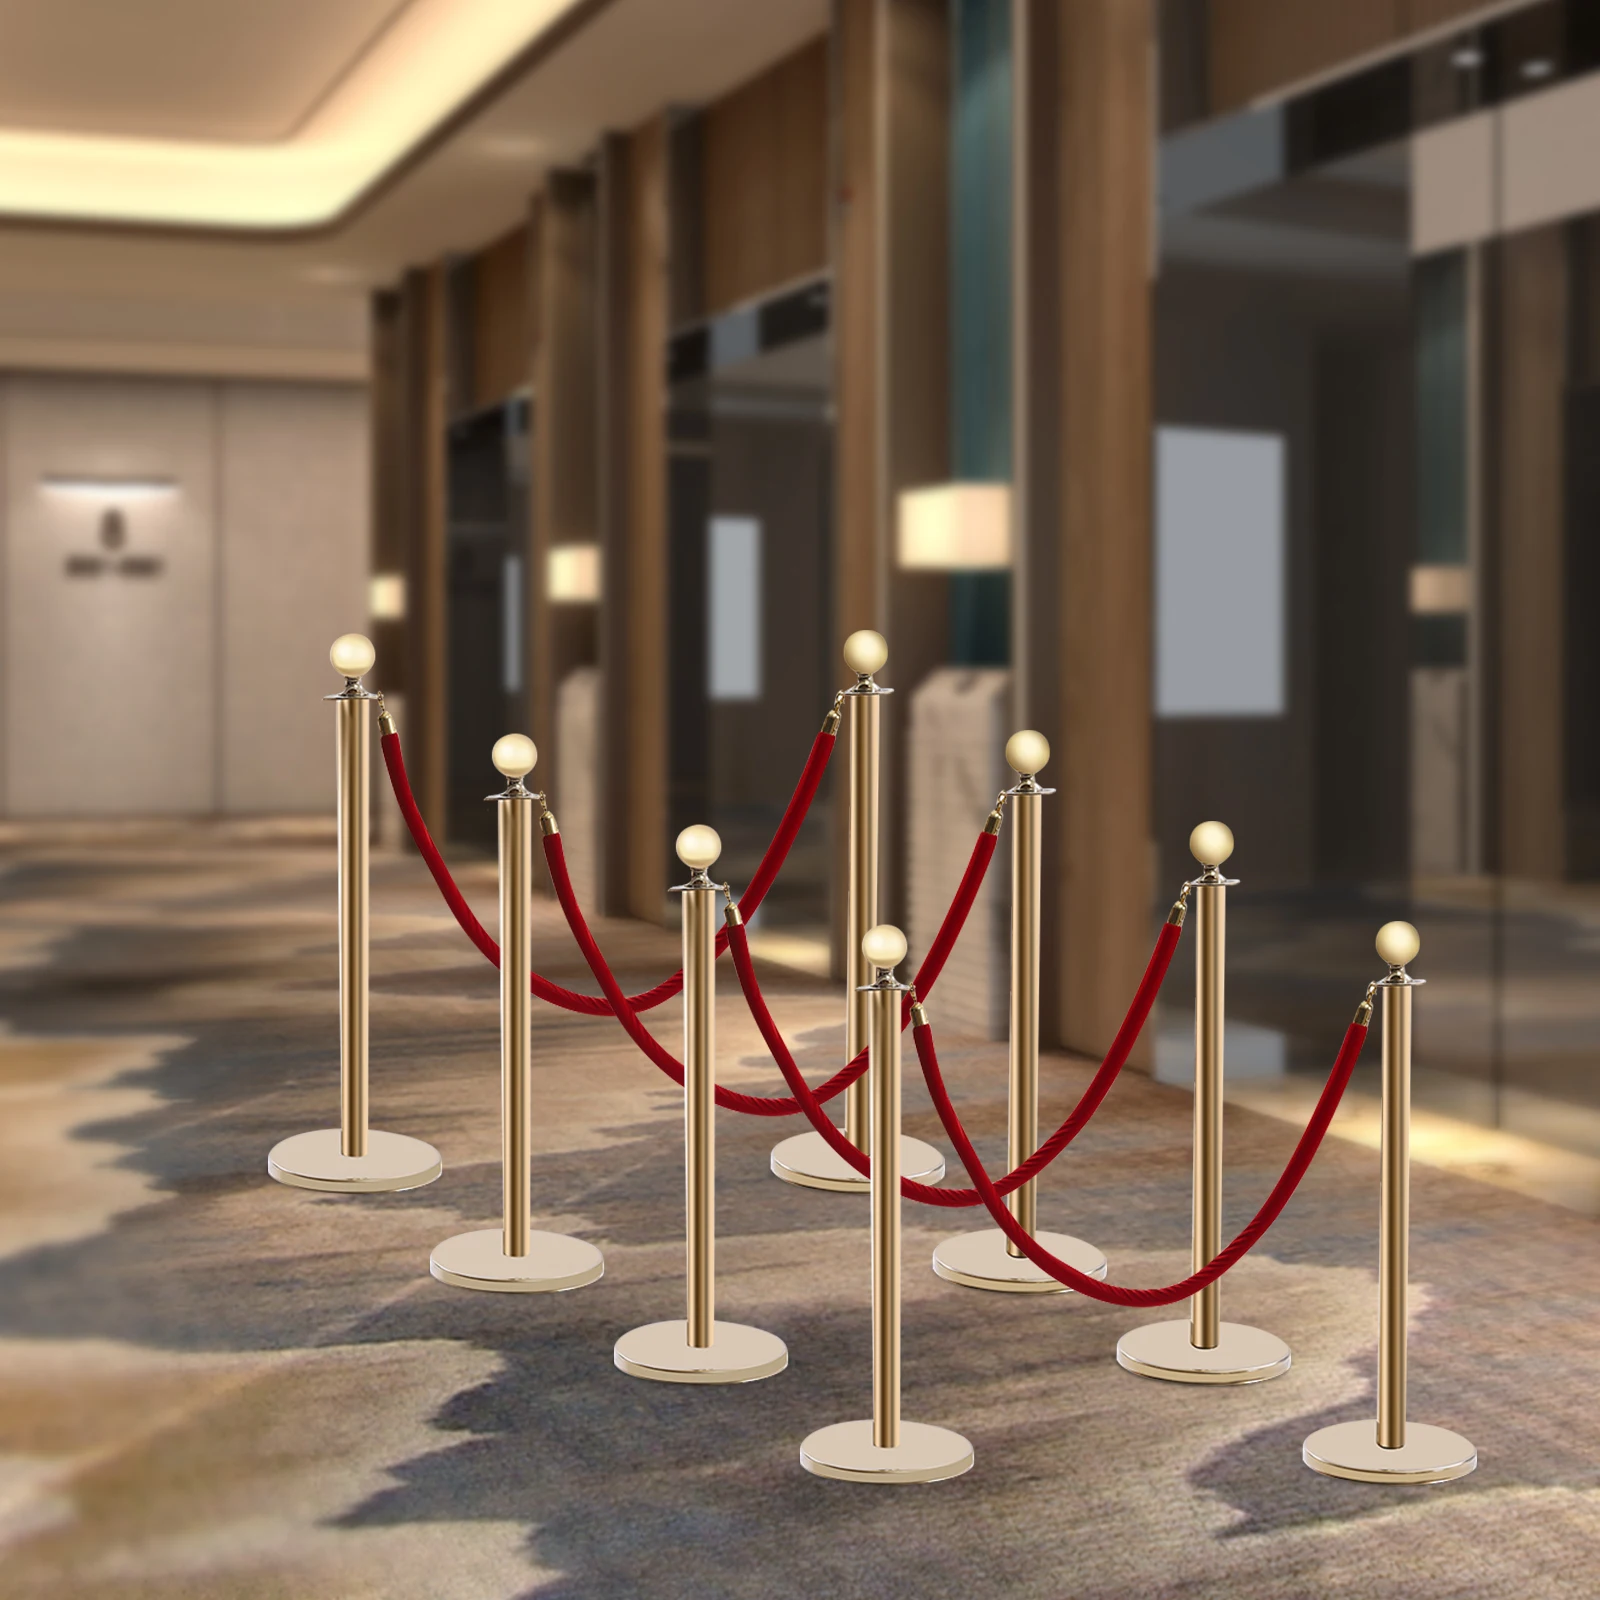 

Set of 8 Pieces Stanchion Set, Stanchion Set with 5 ft/1.5 m Red Velvet Rope, Gold Crowd Control Barrier w Metal Base